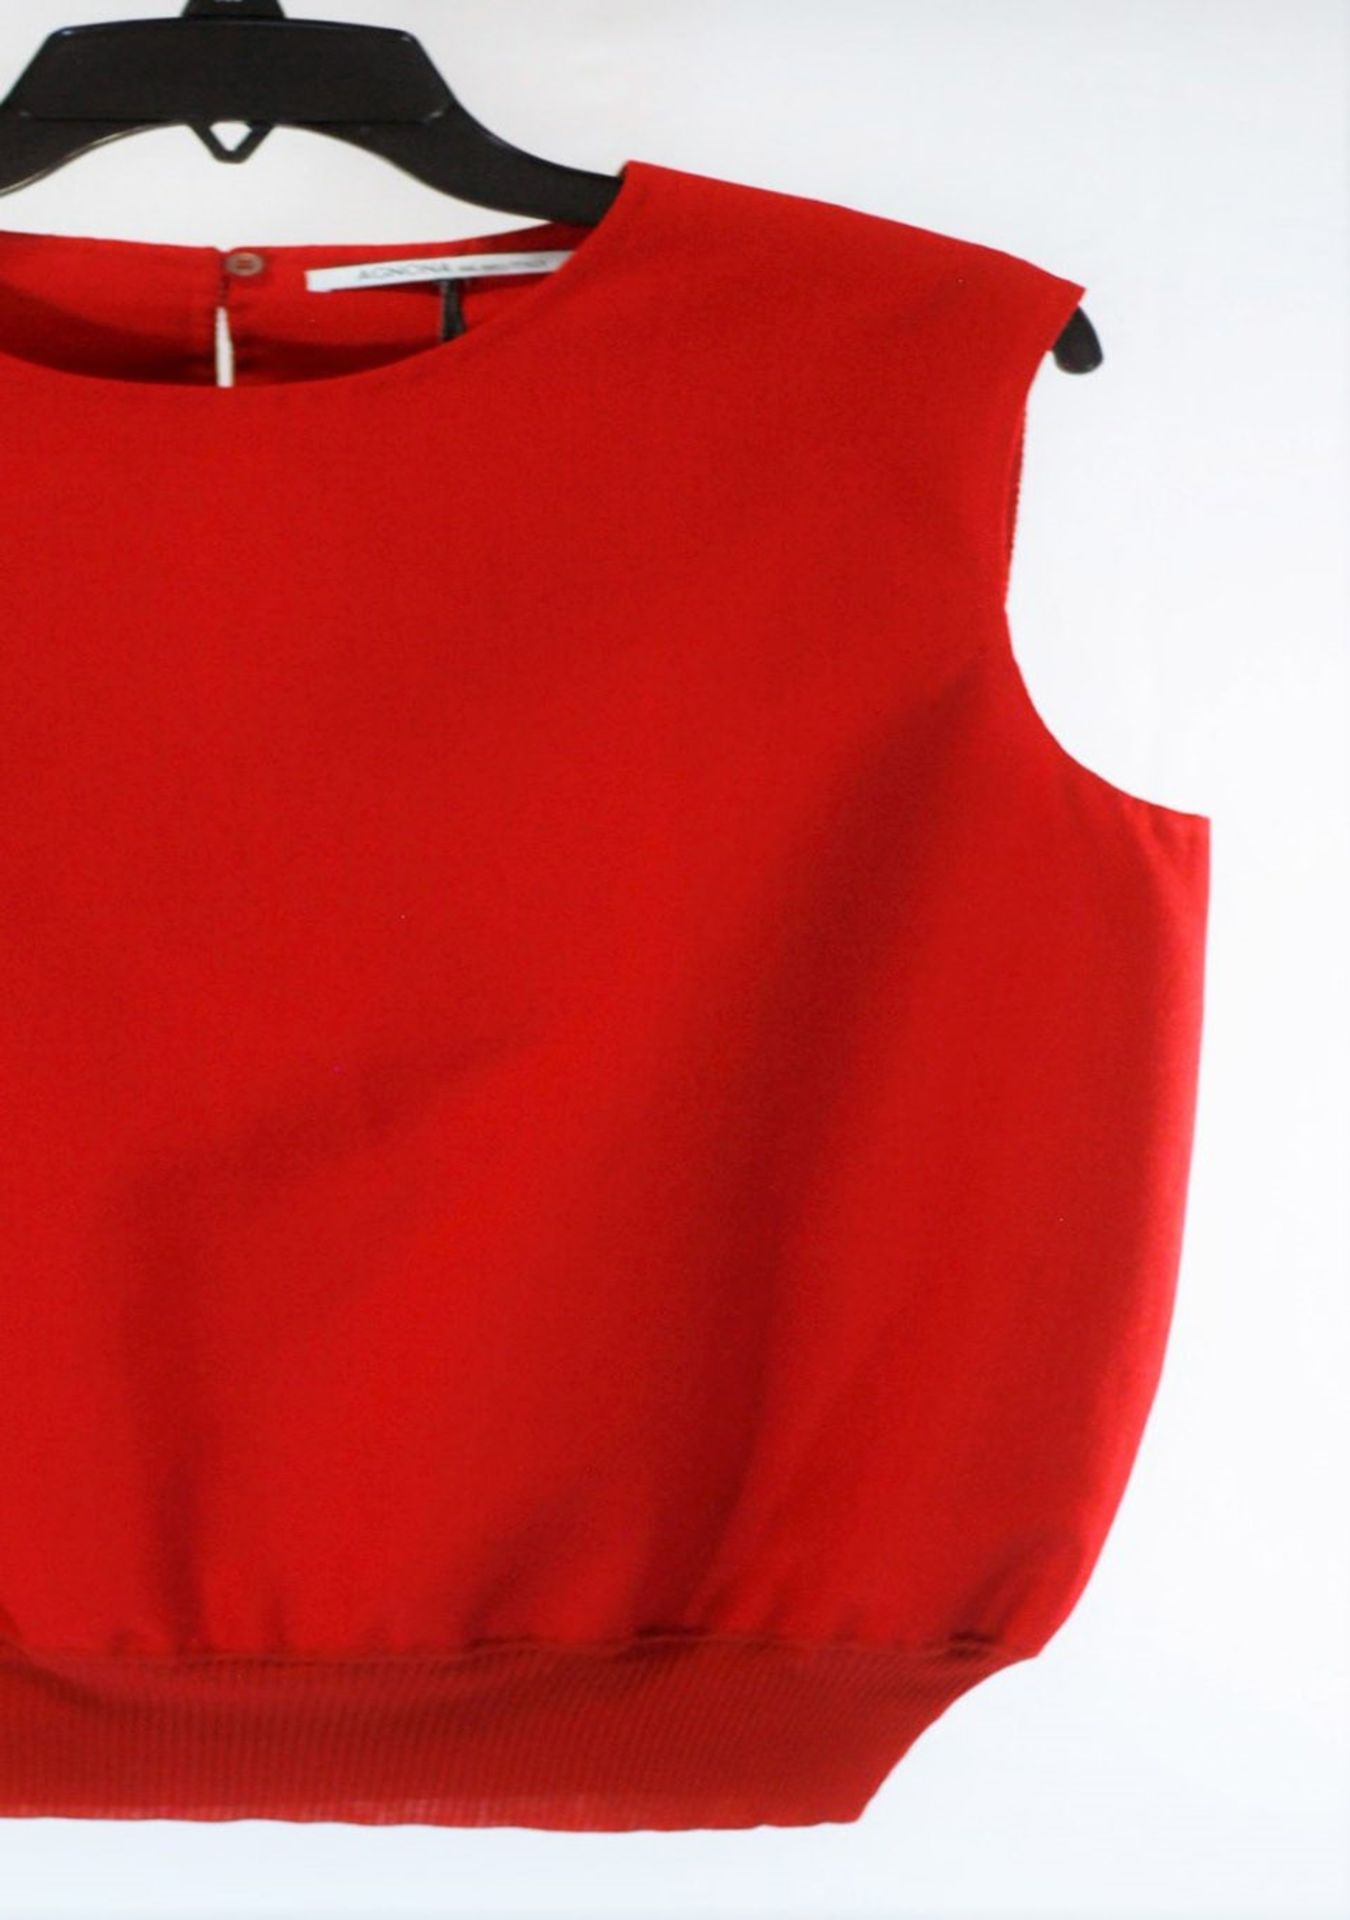 1 x Agnona Red Vest - Size: 18 - Material: 50% Cotton, 28% Mohair, 18% Silk, 4% Wool. Details 55% - Image 8 of 8